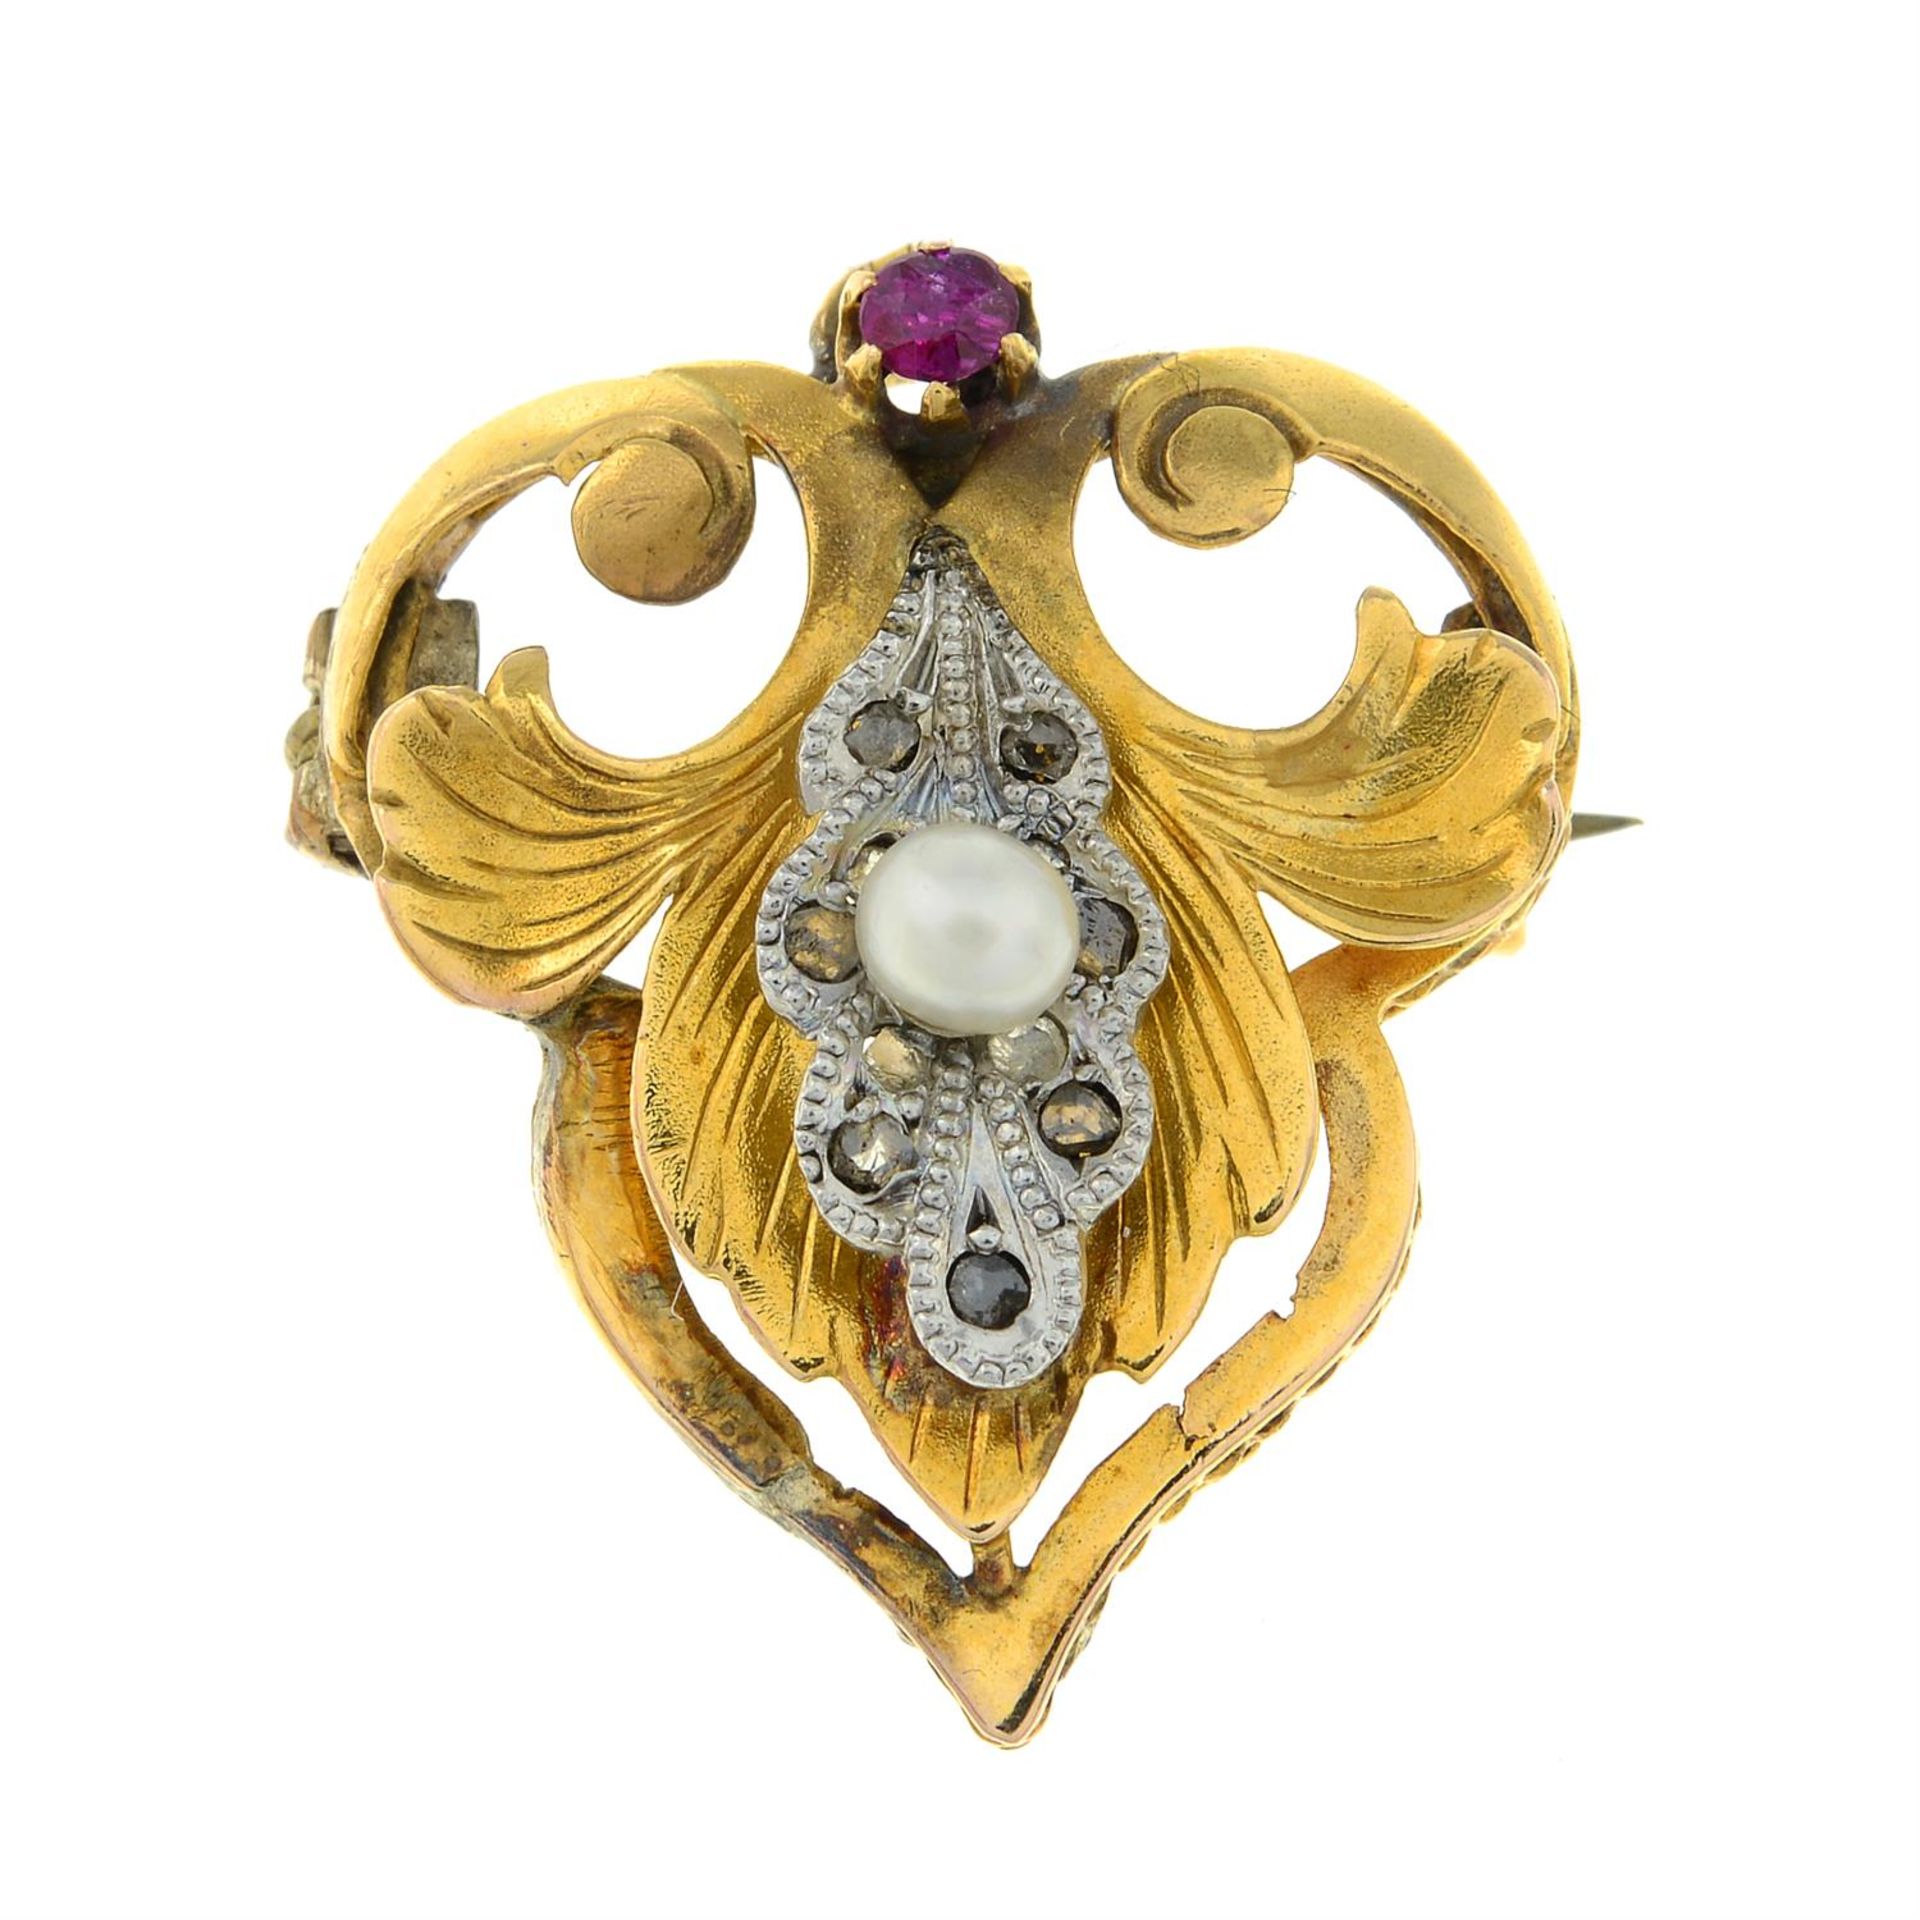 A ruby, rose-cut diamond and seed pearl brooch.